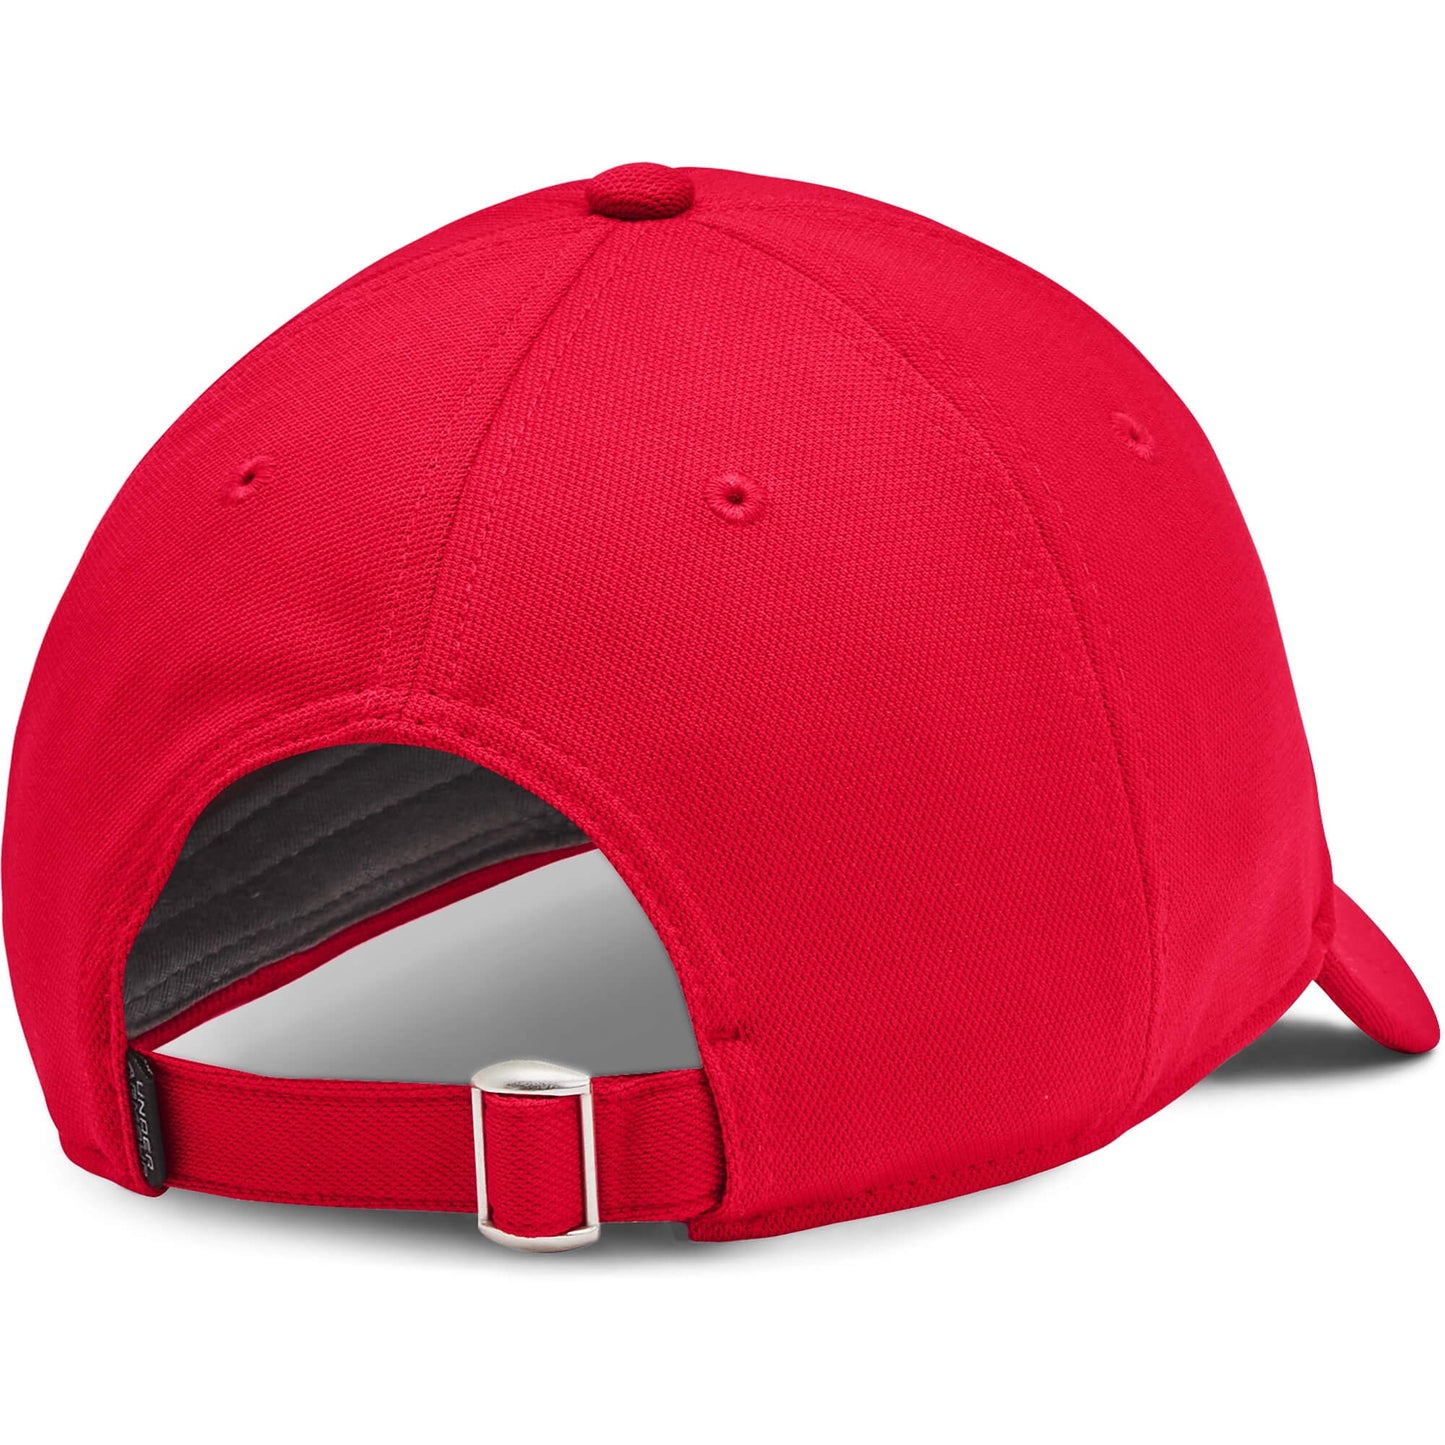 Under Armour Blitzing adjustable hat red